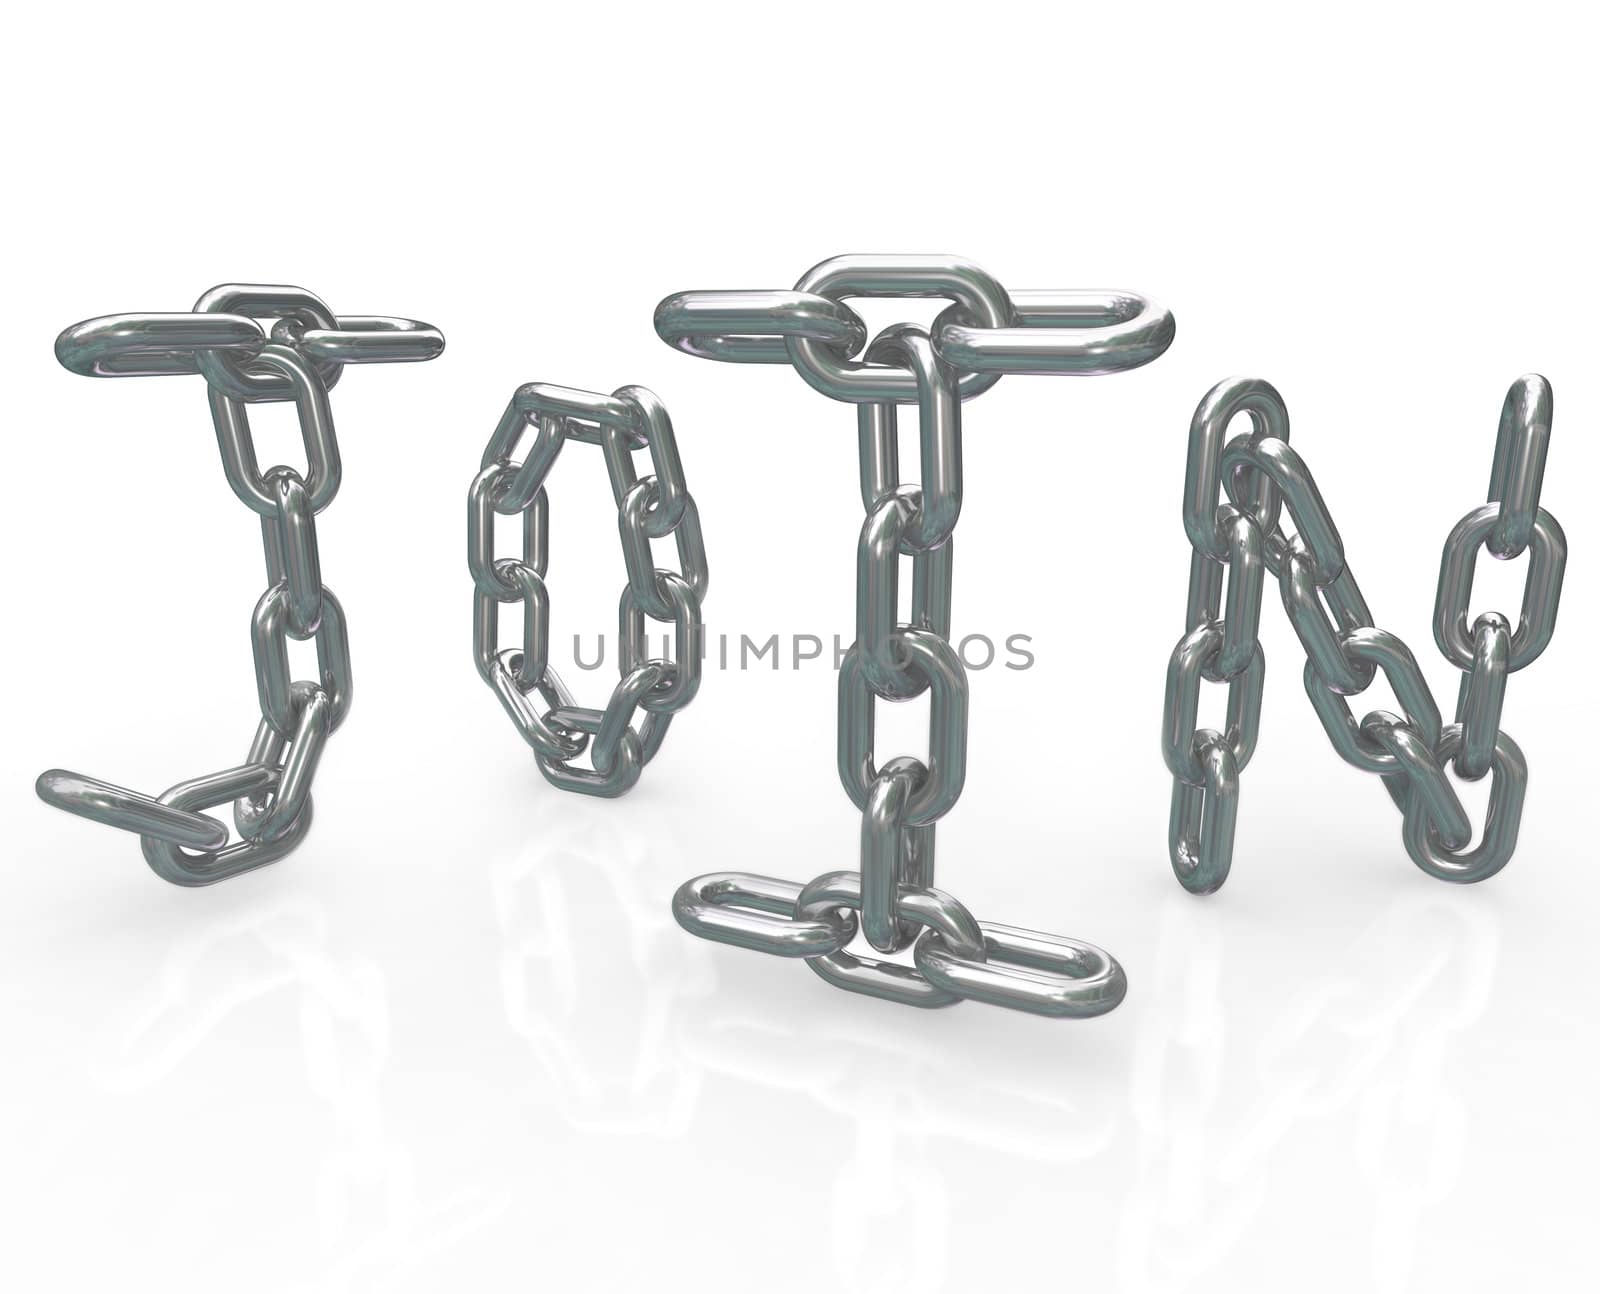 Join Word in Chain Links Joining Group Locked In by iQoncept